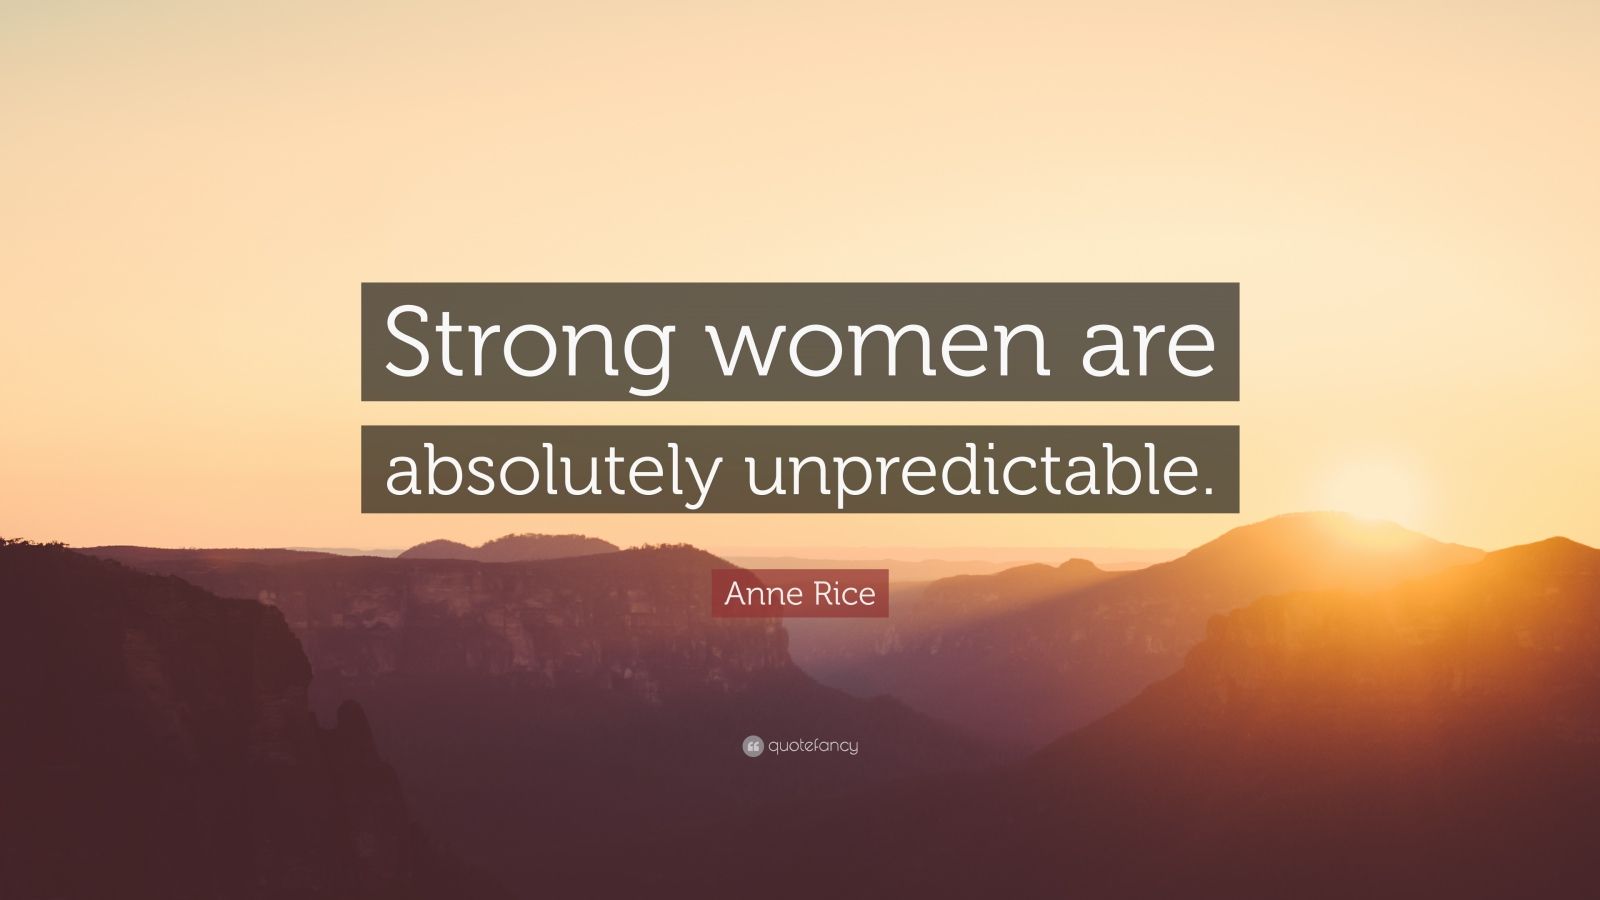 Anne Rice Quote: “Strong women are absolutely unpredictable.” (12 wallpaper)